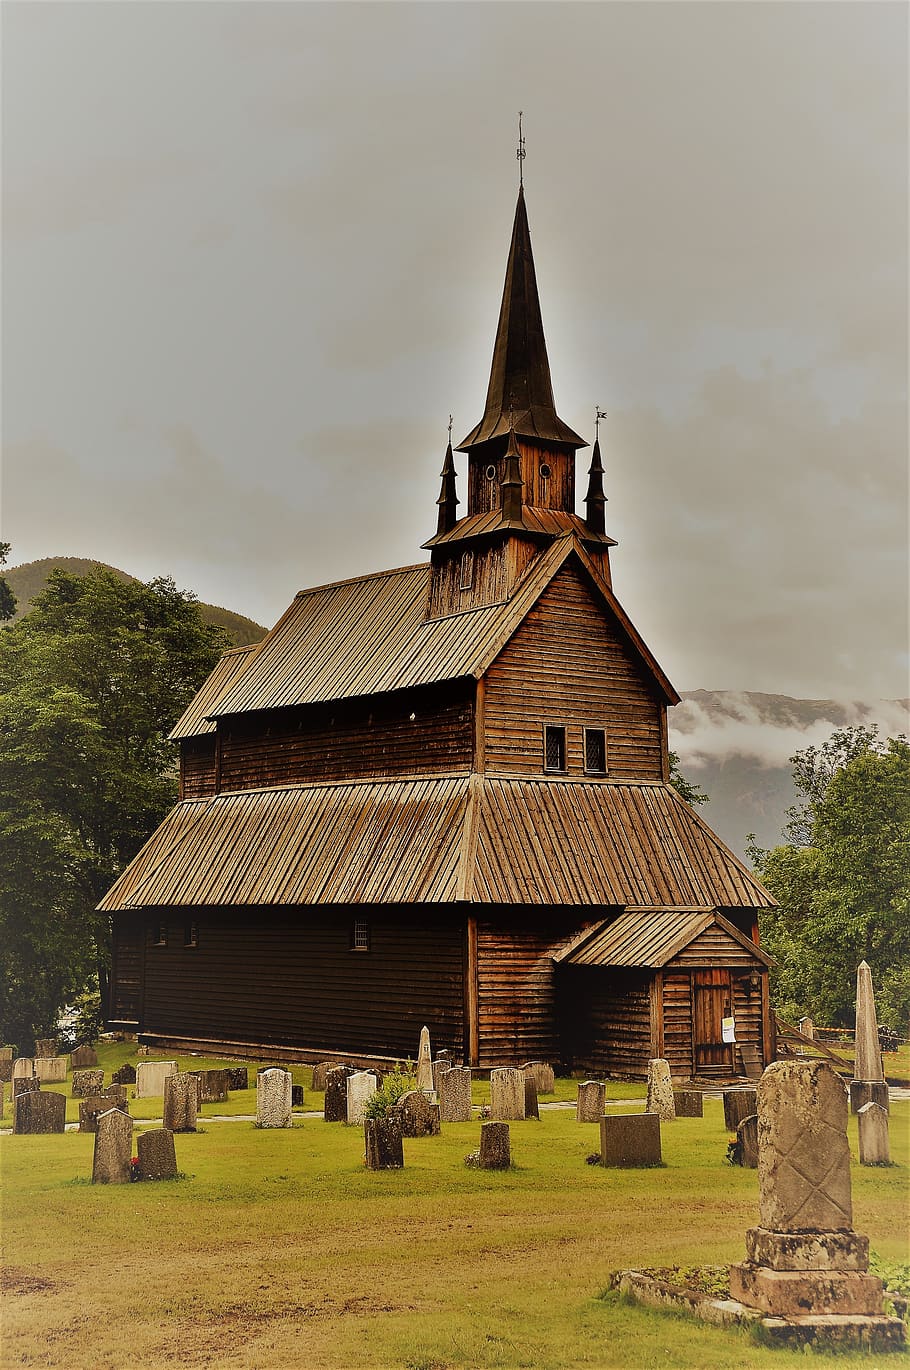 stave church, norway, church, building, wooden church, kaupanger, historically, places of interest, architecture, construction